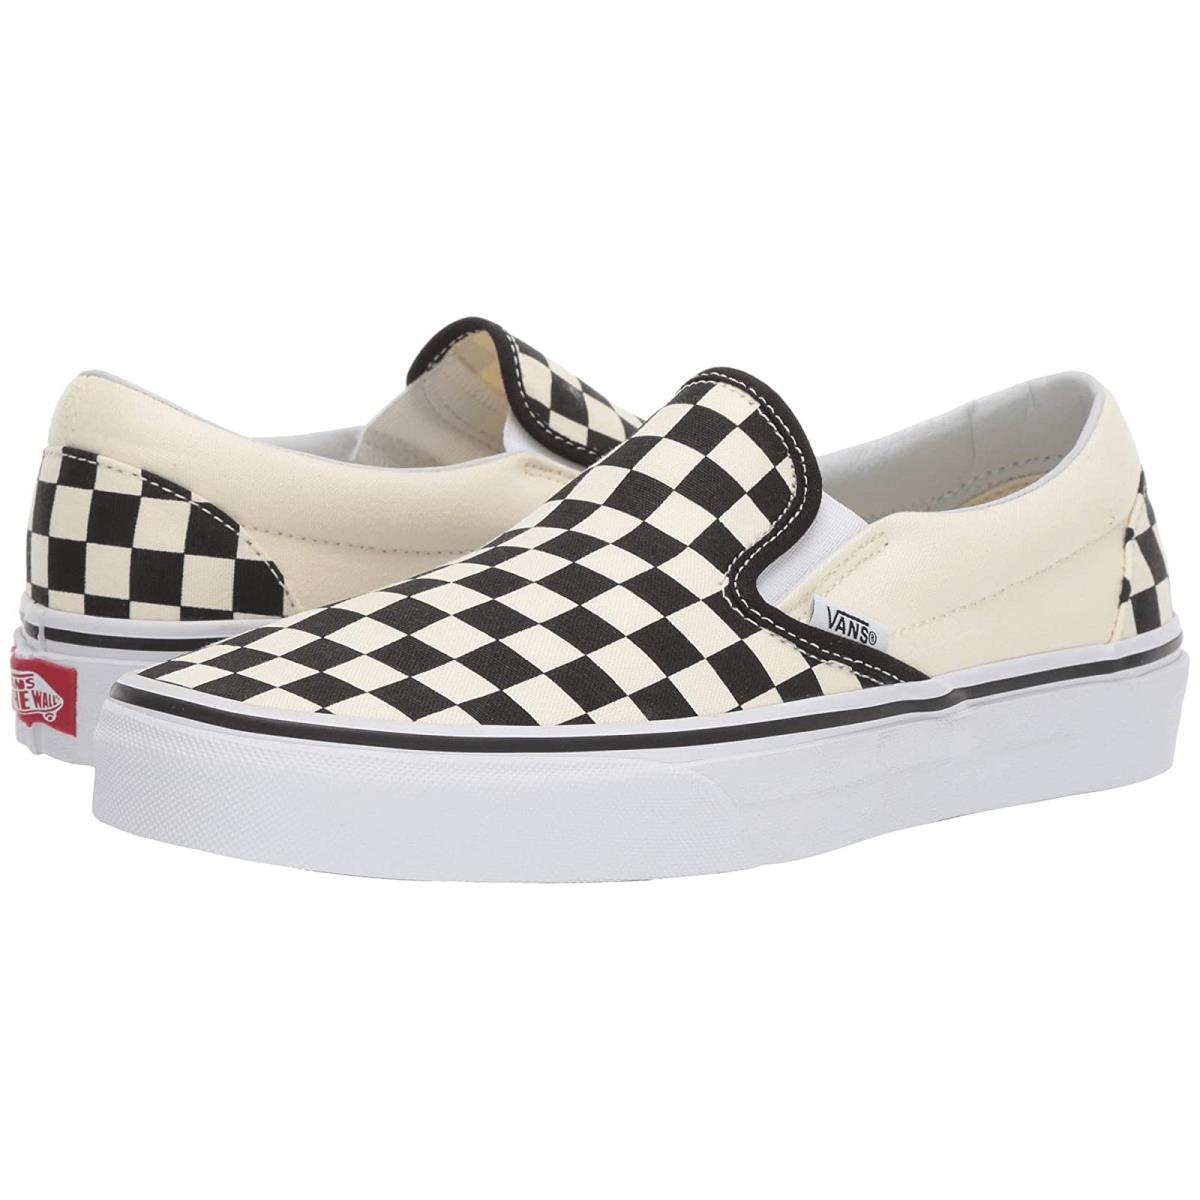 Unisex Sneakers Athletic Shoes Vans Classic Slip-on Core Classics Black and White Checker/White (Canvas)